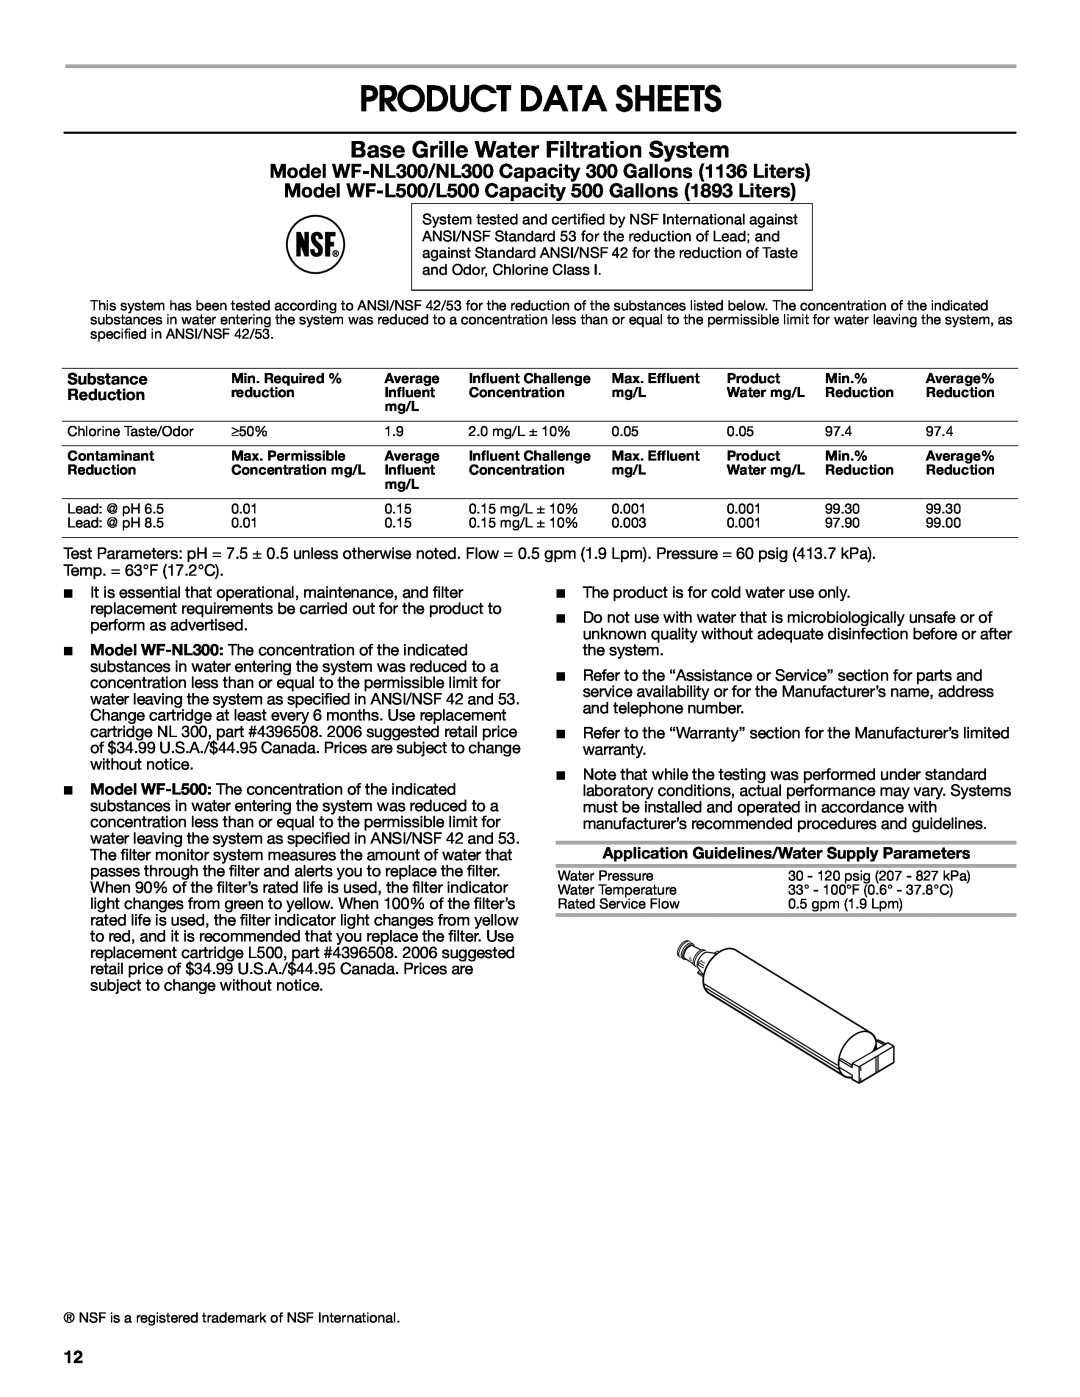 Whirlpool RS22AQXMQ01 warranty Product Data Sheets, Base Grille Water Filtration System 